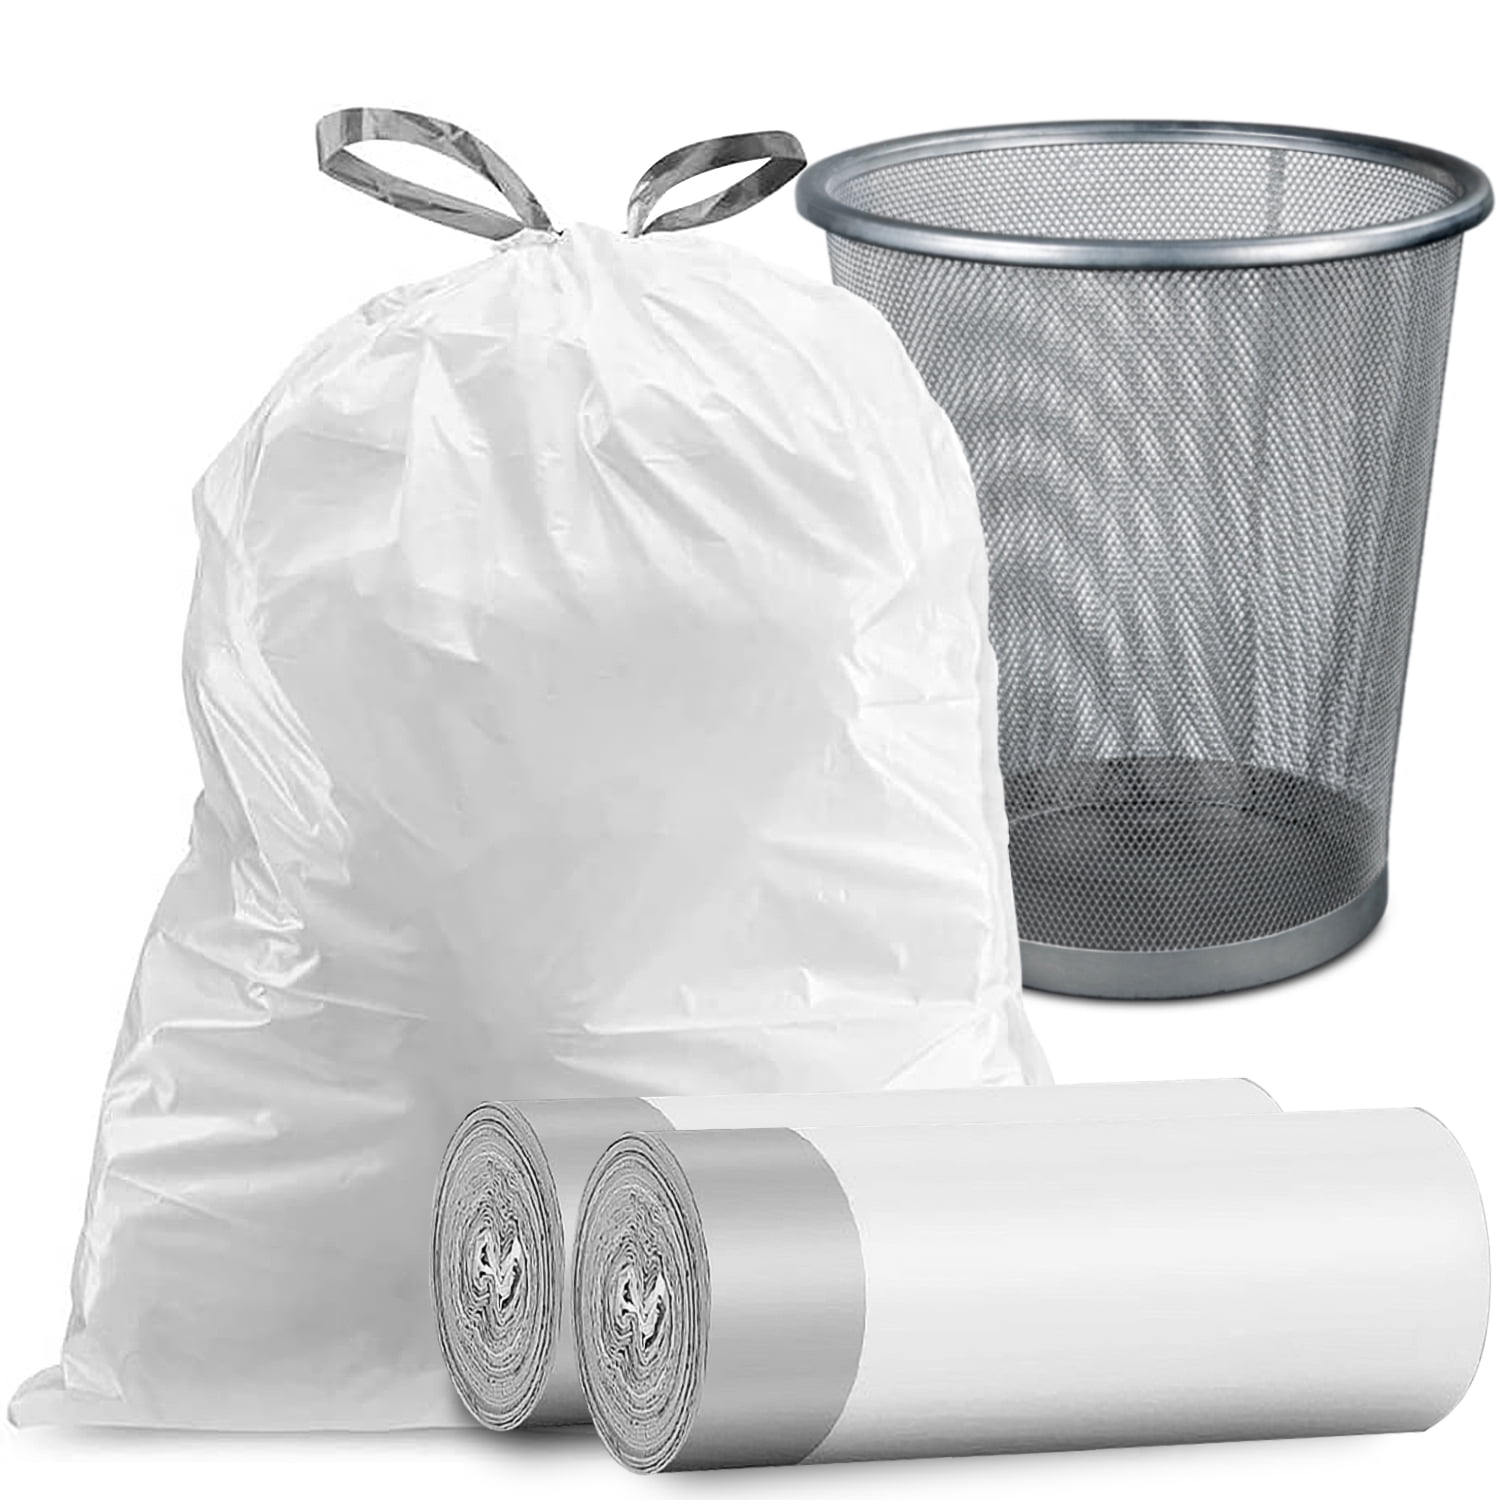 Charmount 8 Gallon Trash Bags, Medium Garbage Can Liners, 34 Count, Size: 8 Gallon Trash Bags 34pcs, White